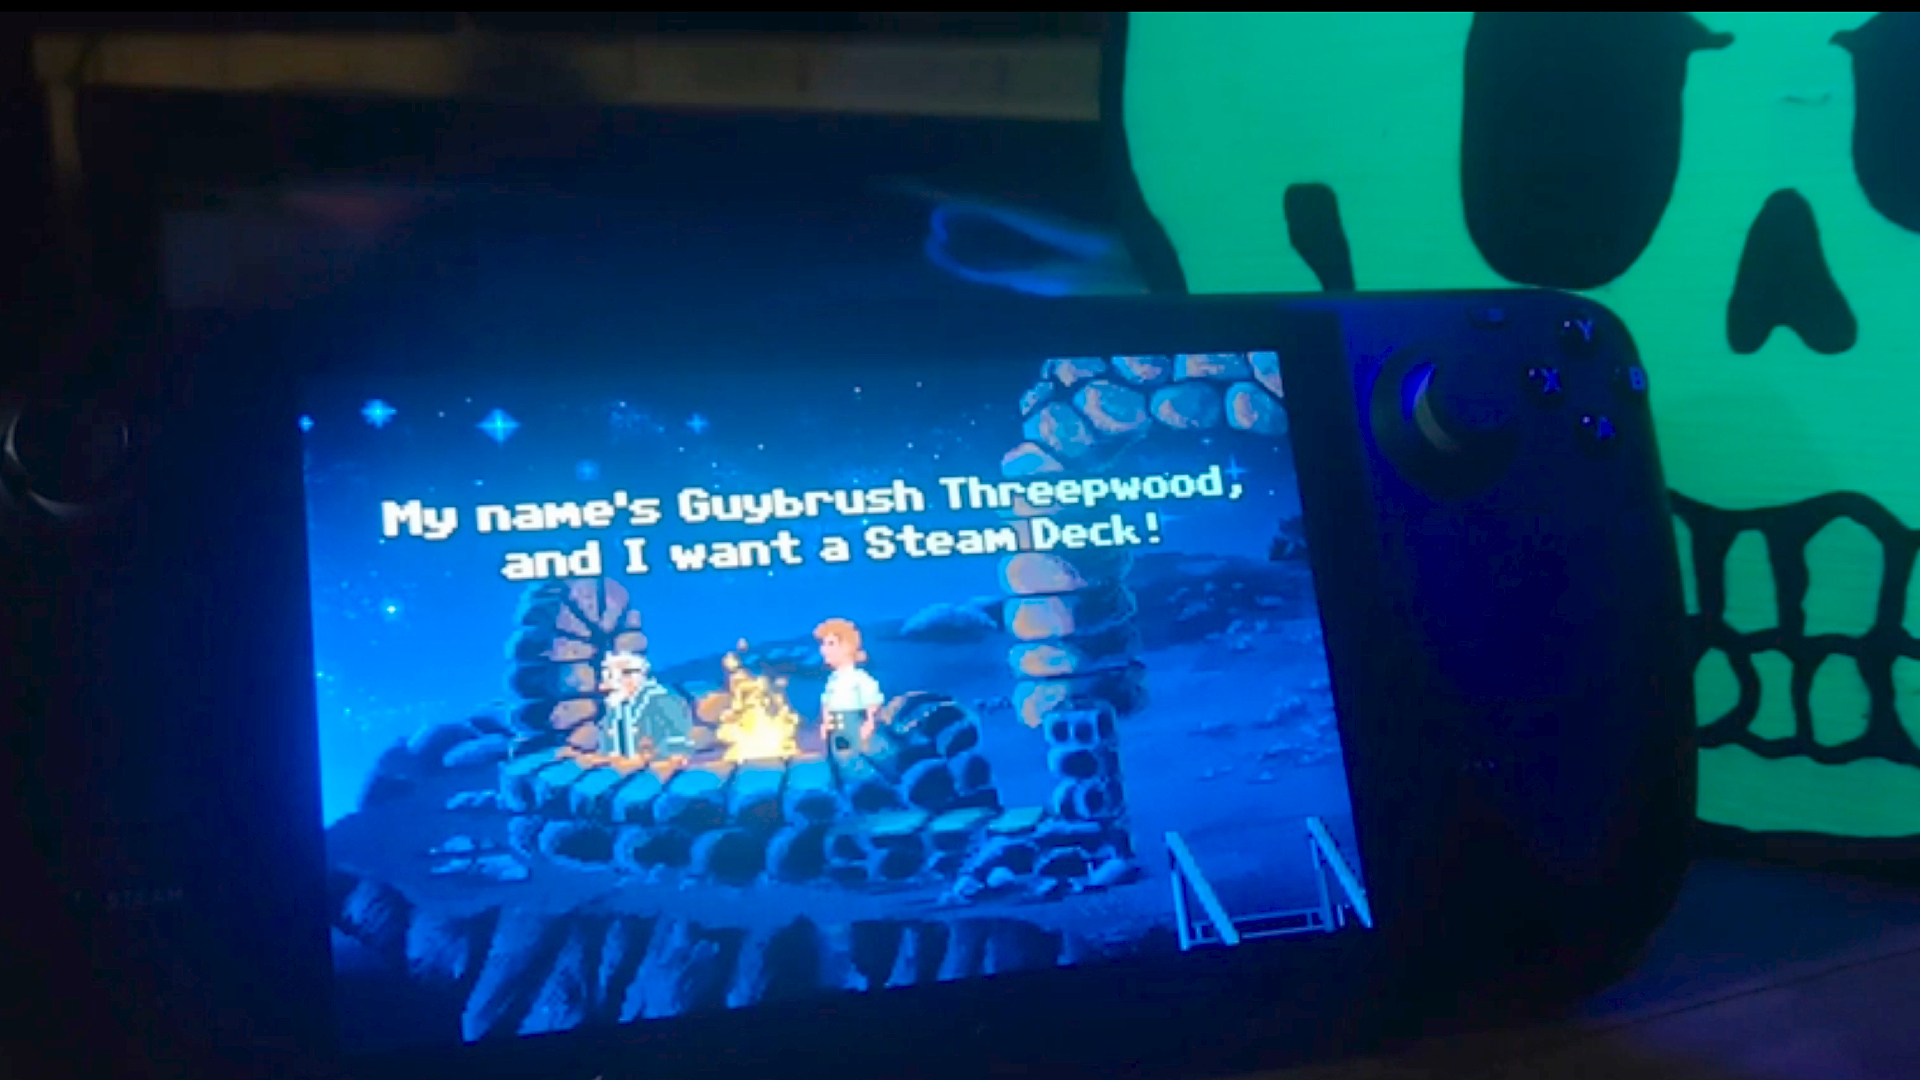 Steam Deck with Secret of Monkey Island on screen and text that reads "My name is Guybrush Threepwood and I want a Steam Deck!"